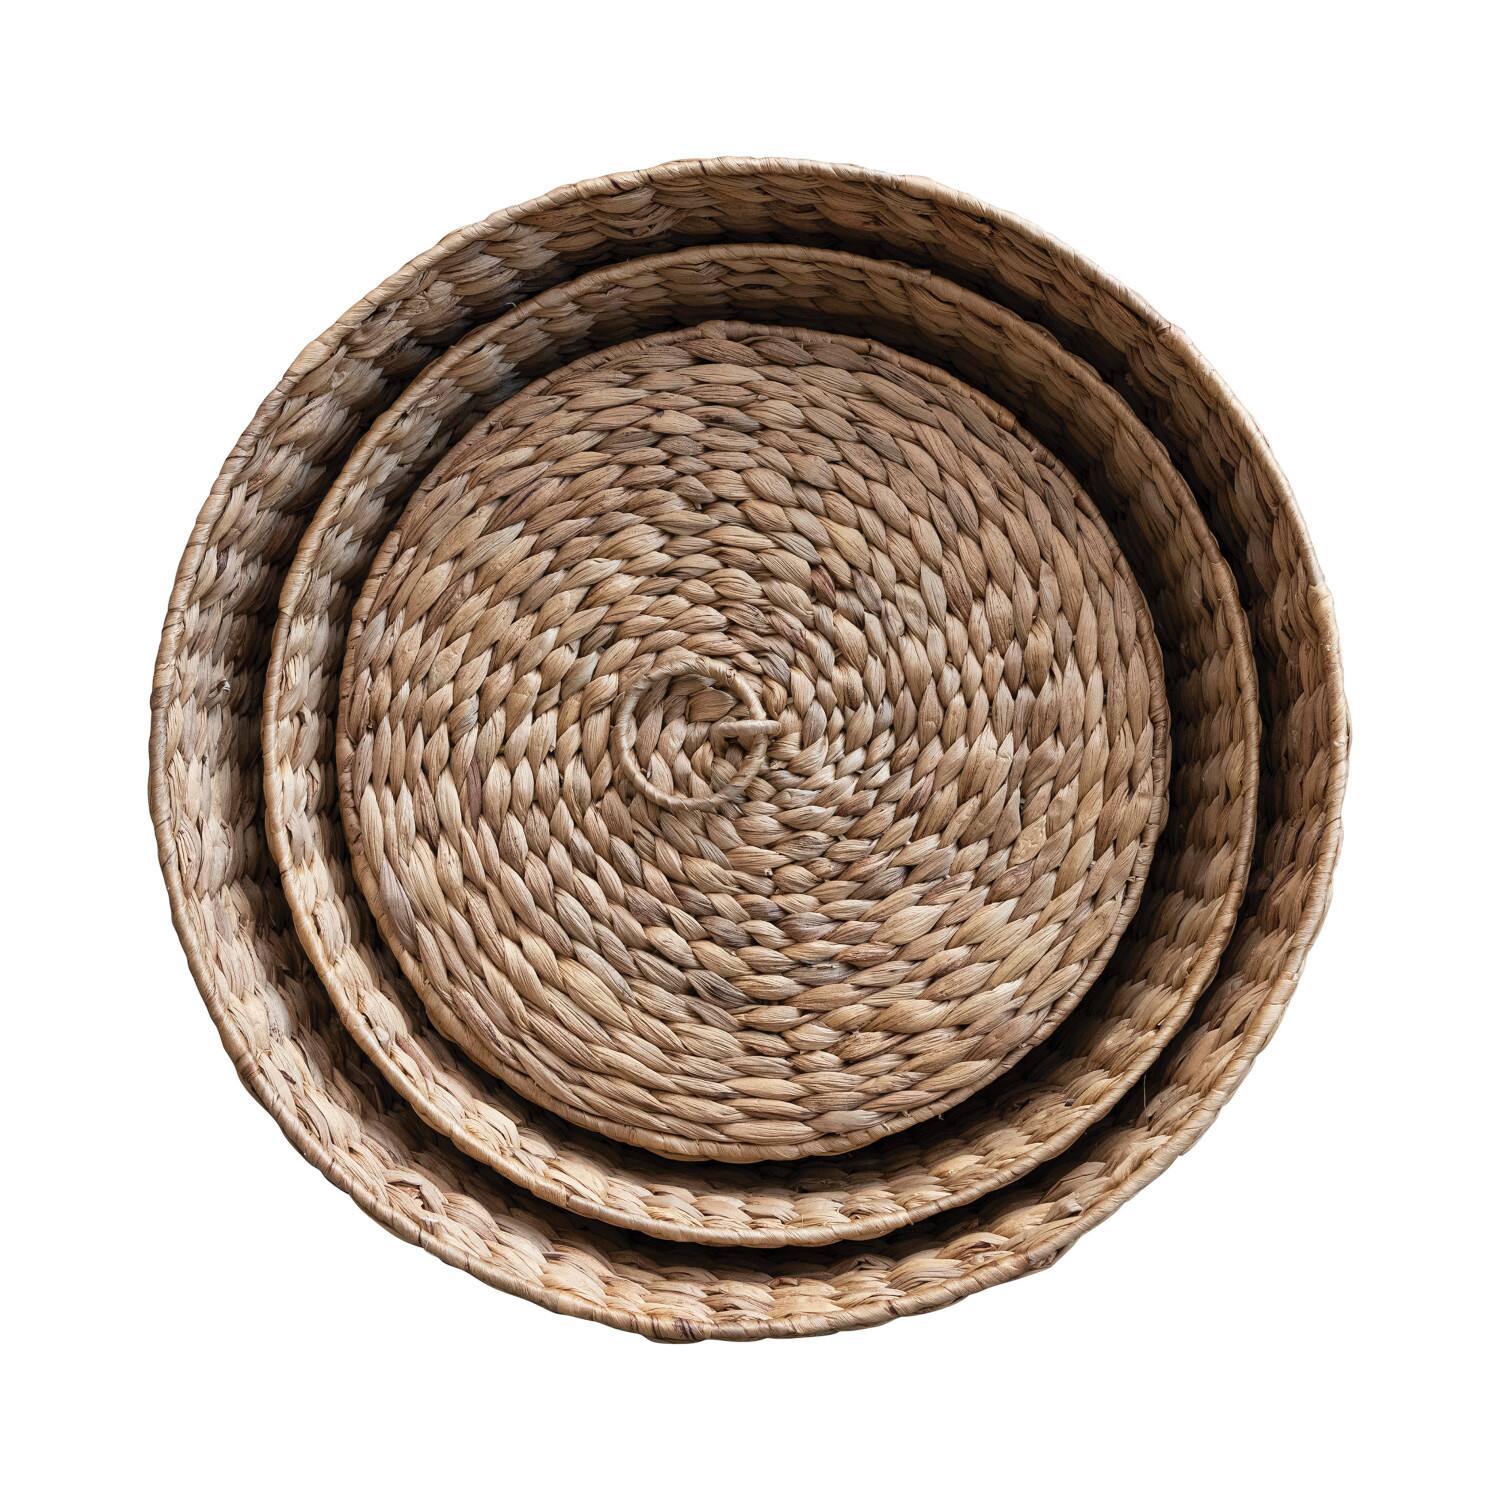 Natural Handwoven Water Hyacinth Laundry Basket Set with Lids